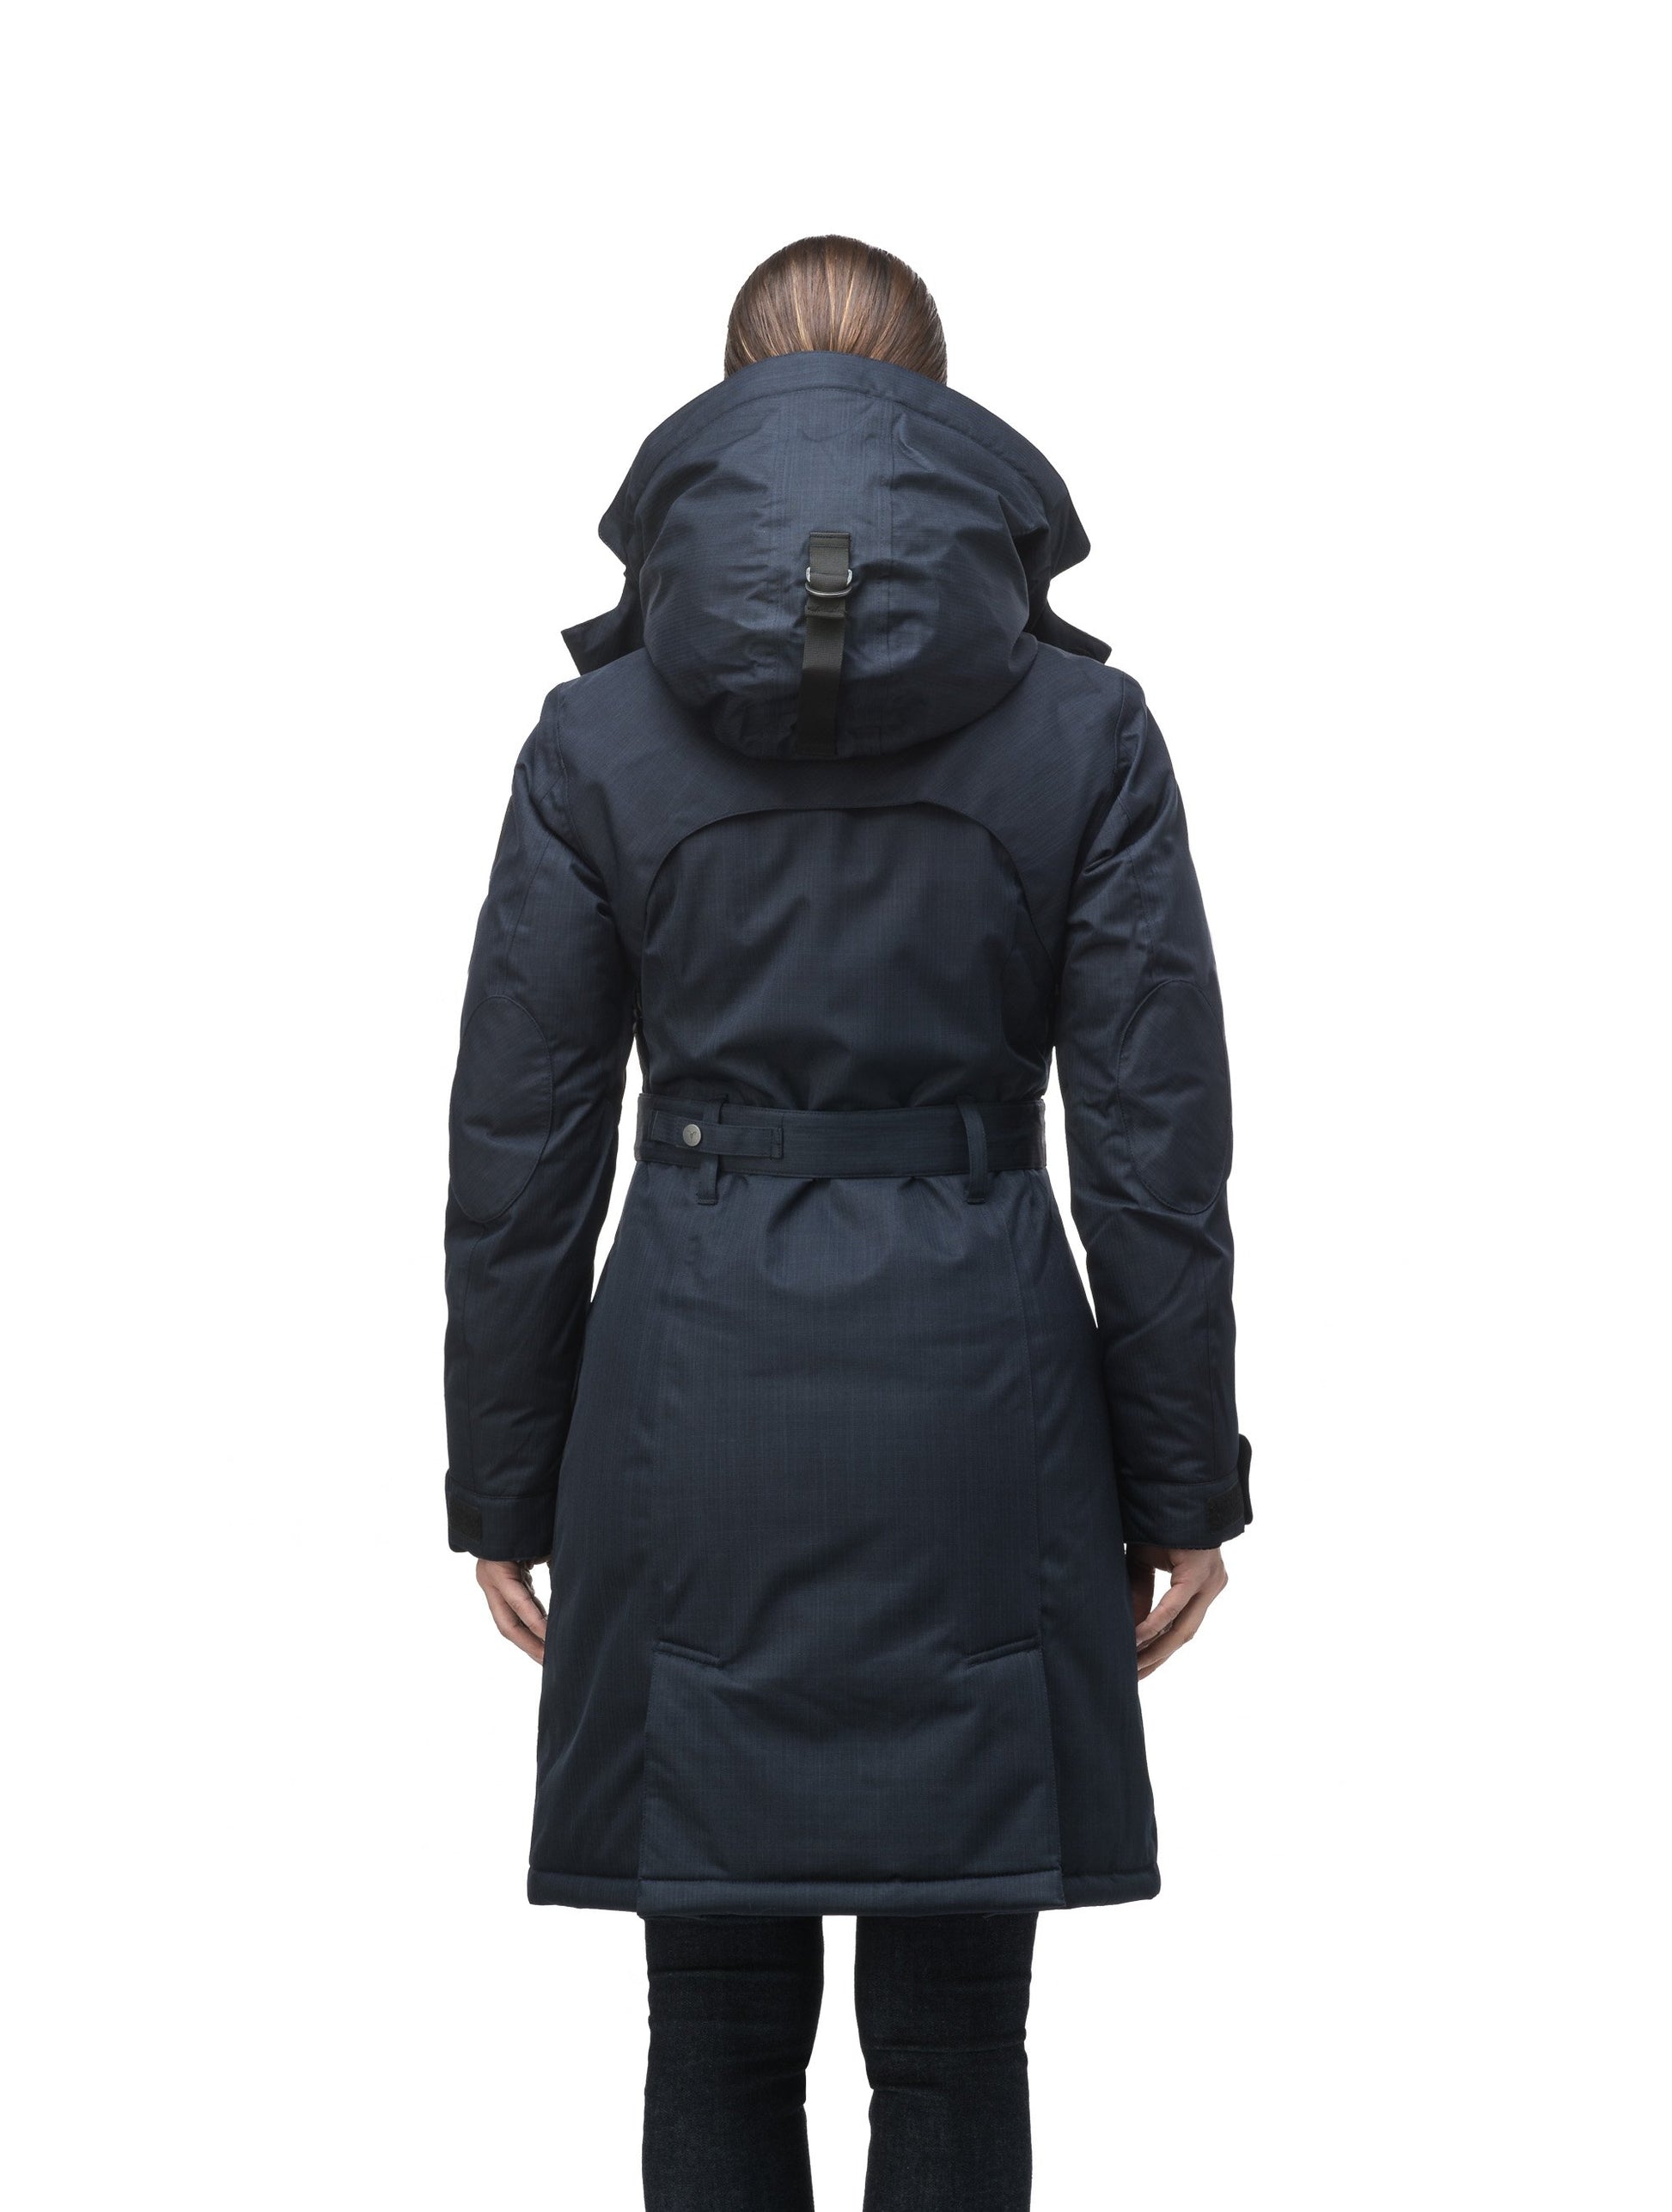 Women's down filled double breasted peacoat with a belted waist in CH Navy